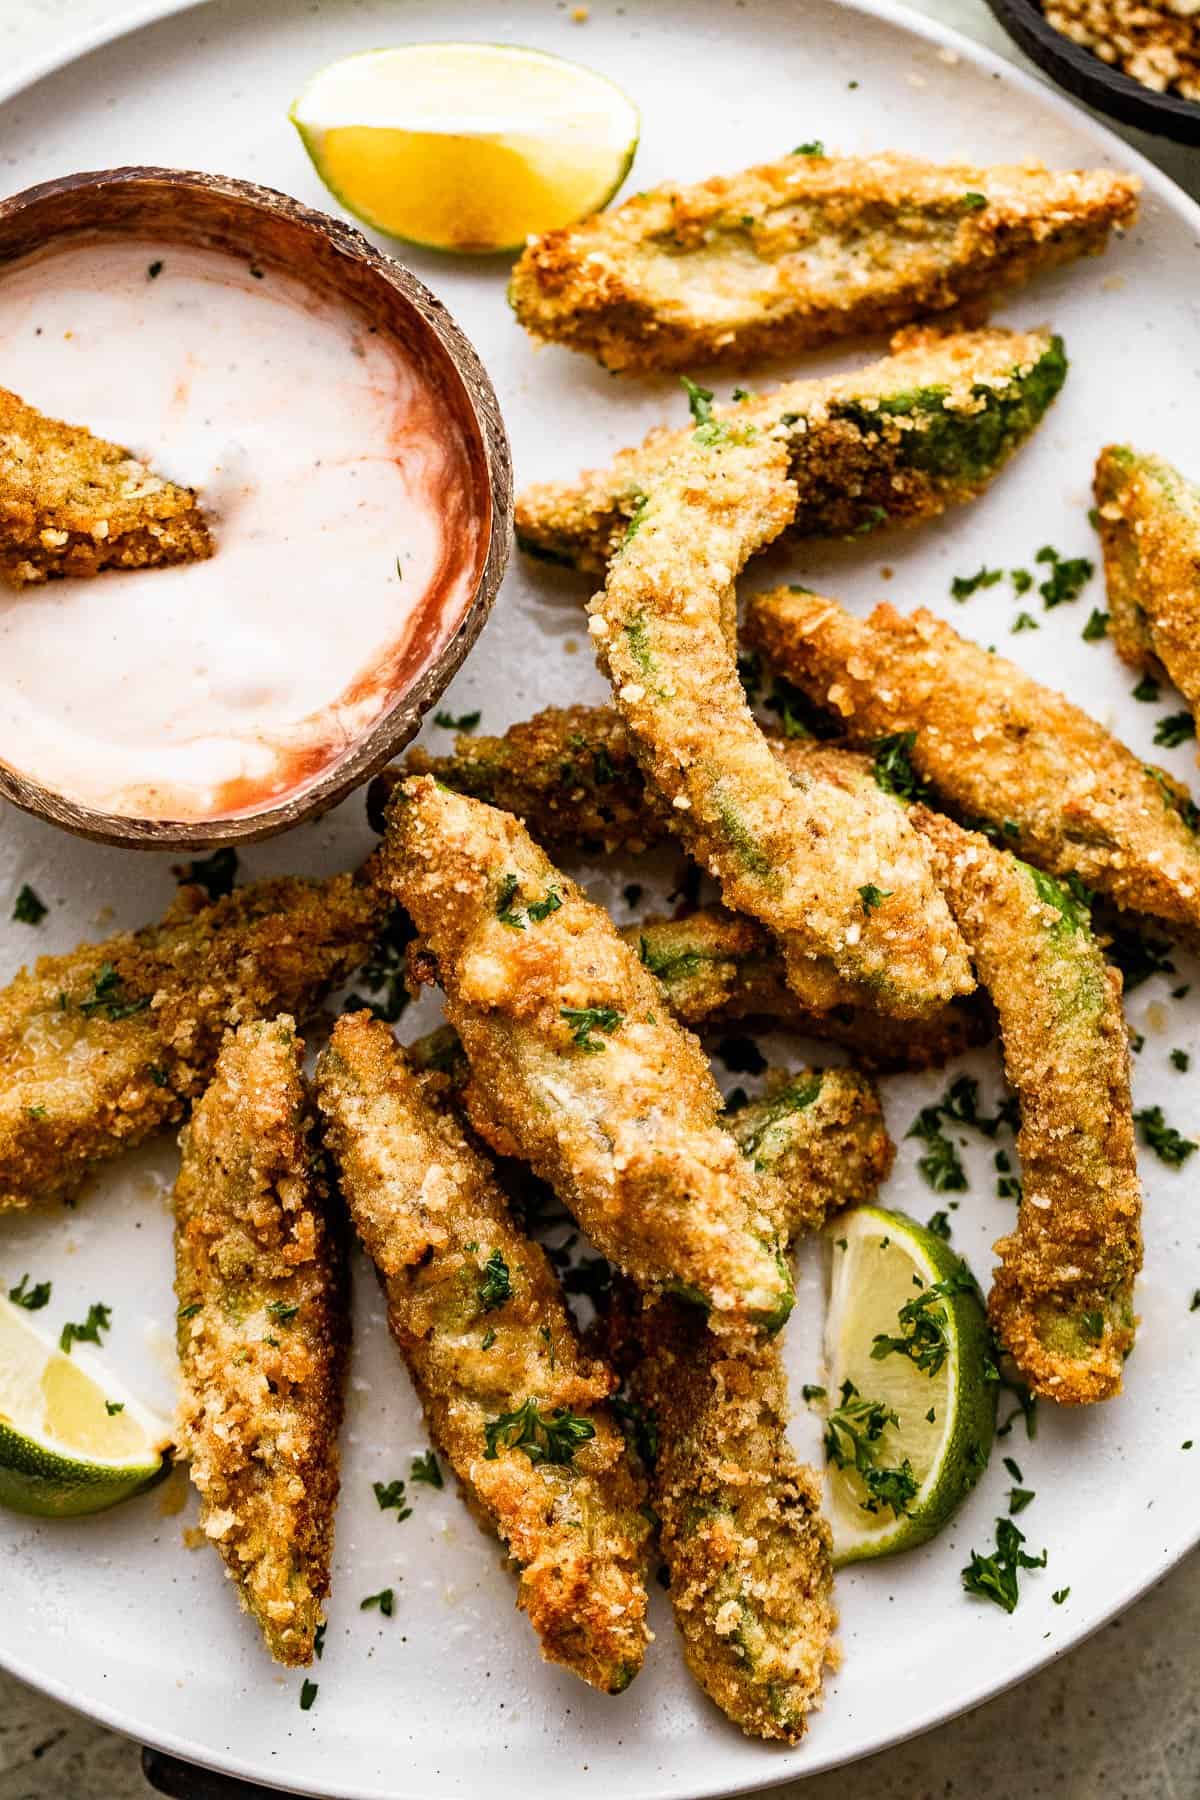 Overhead image of air fried avocado fries arranged on a white plate with a small bowl of ranch dipping sauce also served on the plate.